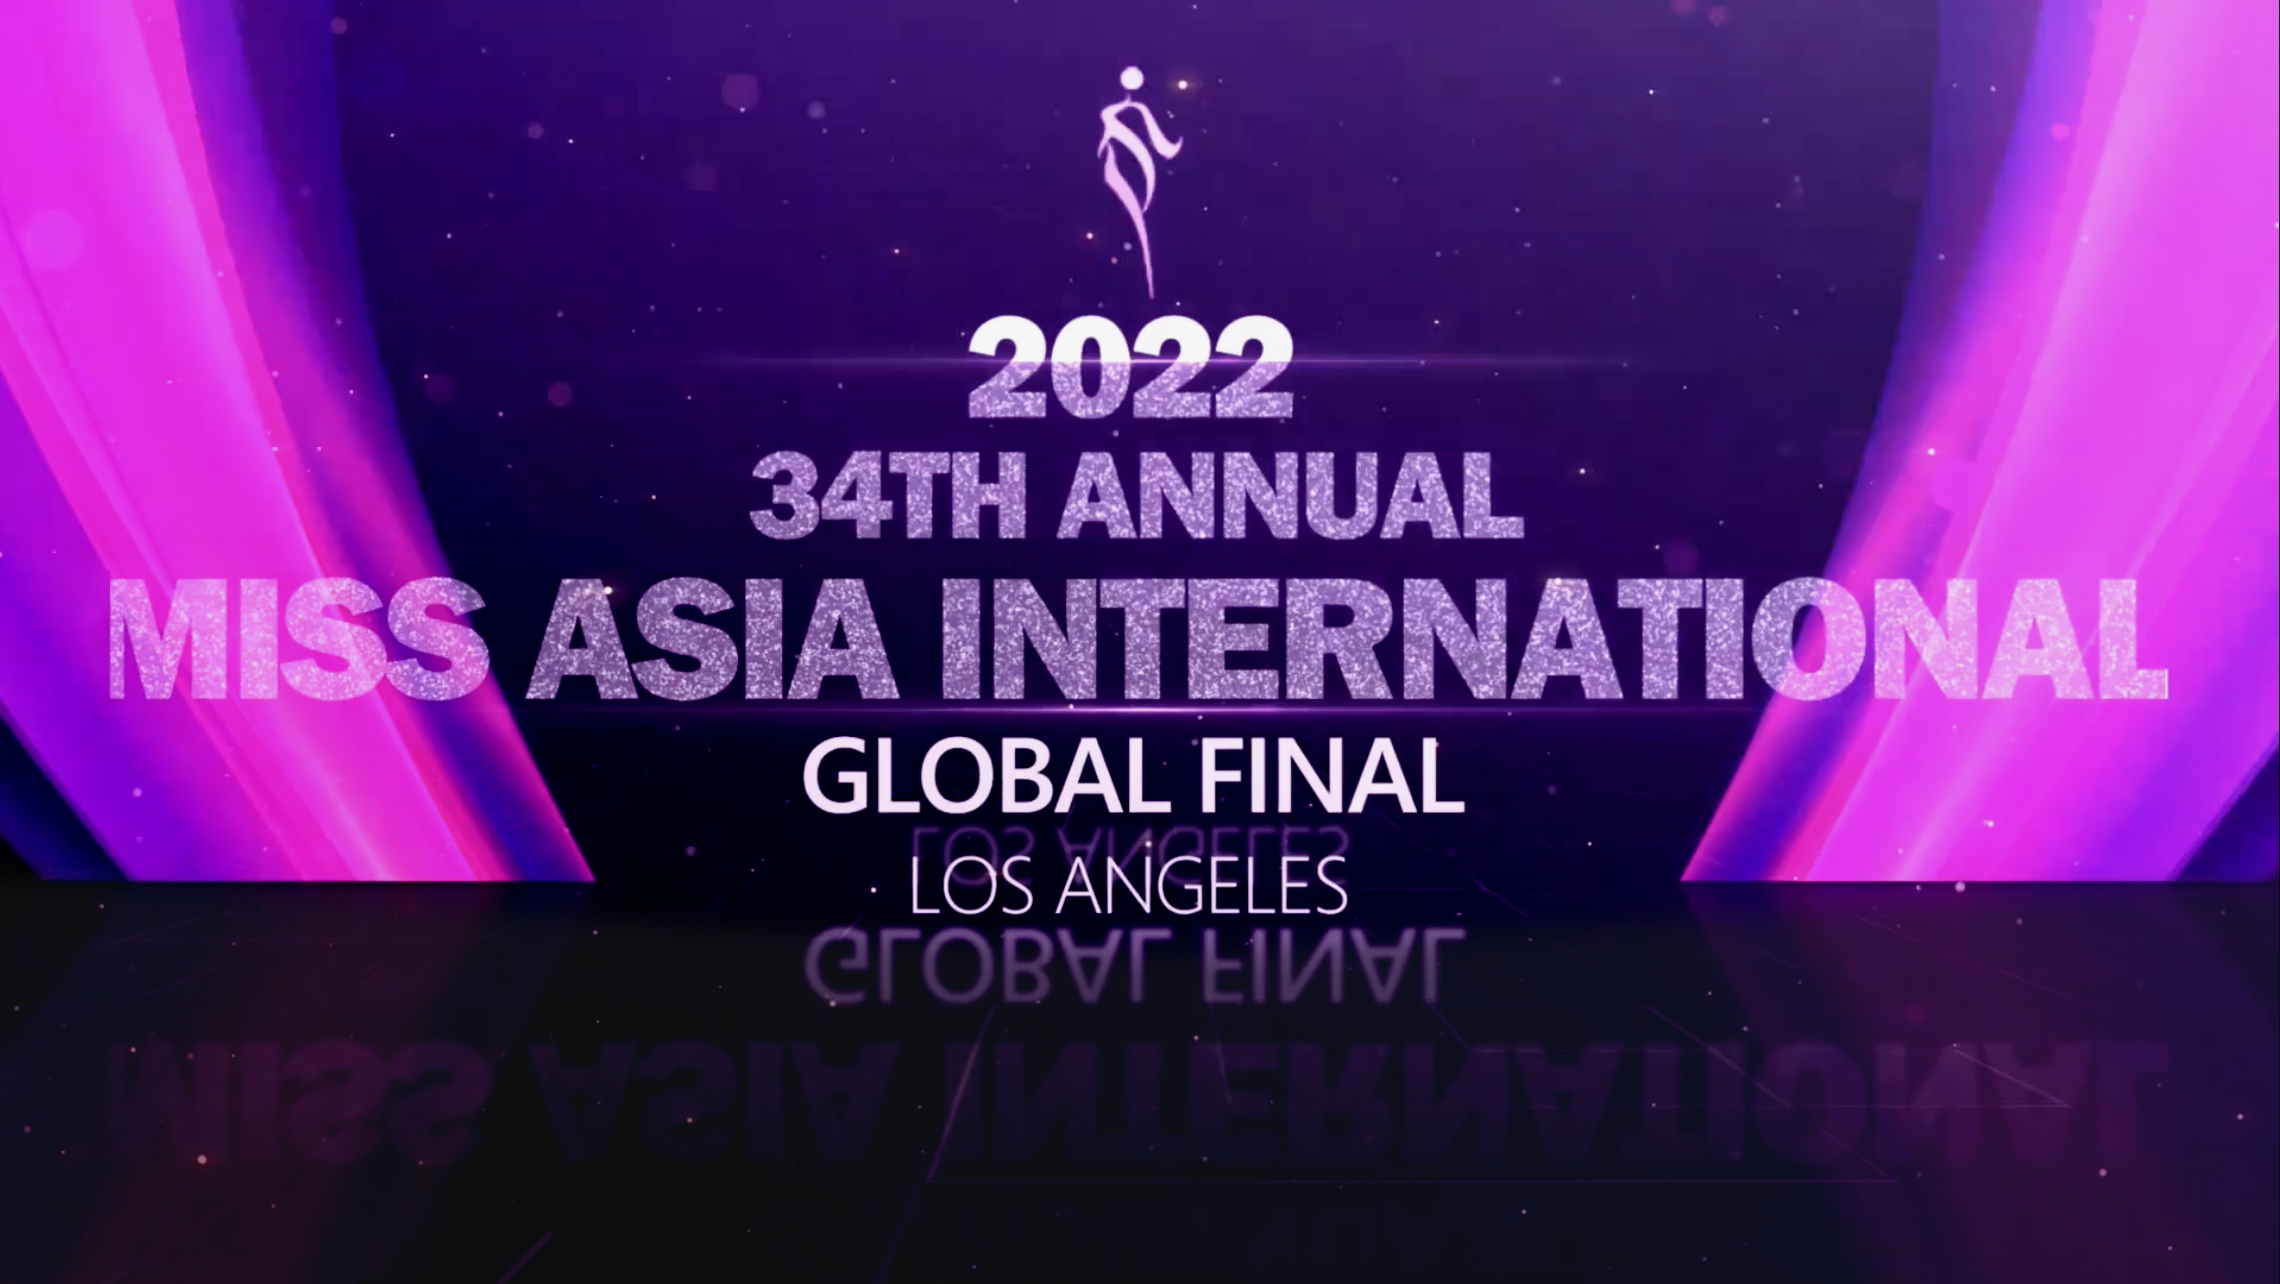 Welcome to the 34th Miss Asia International Global Final